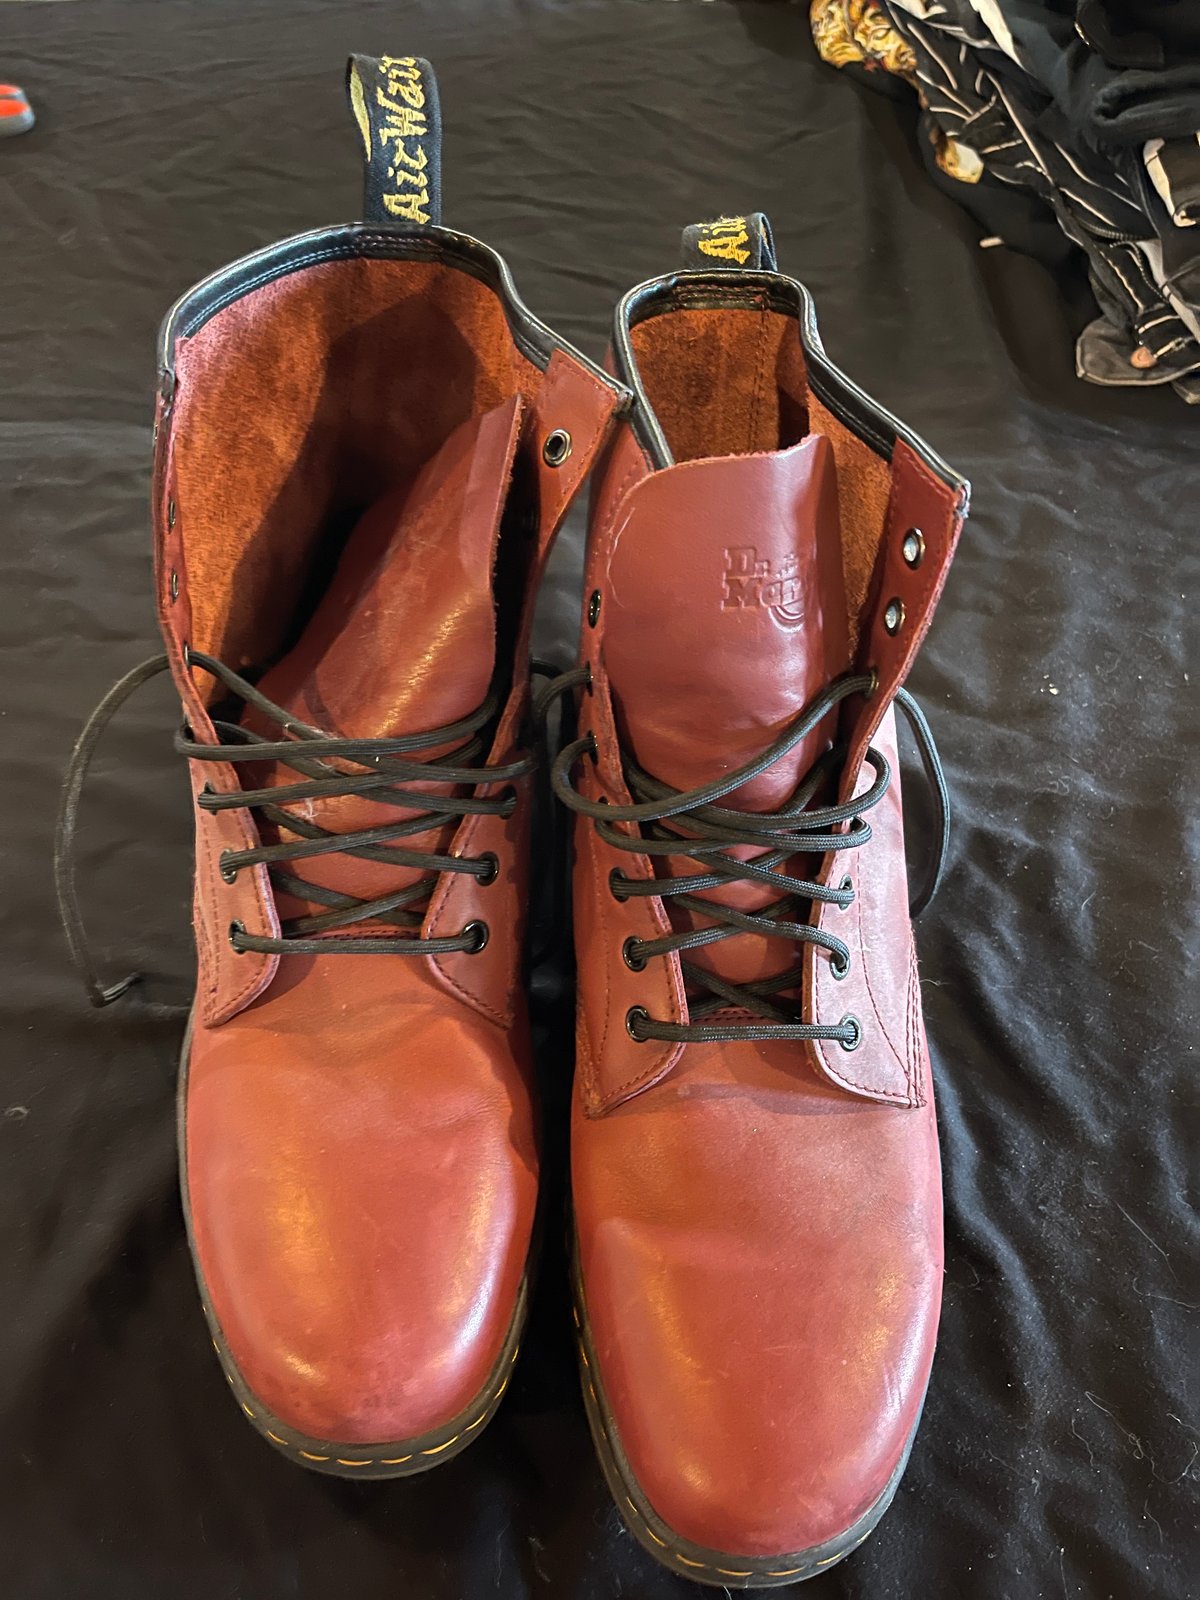 stretch cake Blank Brick Red Doc Martens Soft Wair Boots - Size 12 US / 11 UK | RED'S PLANET